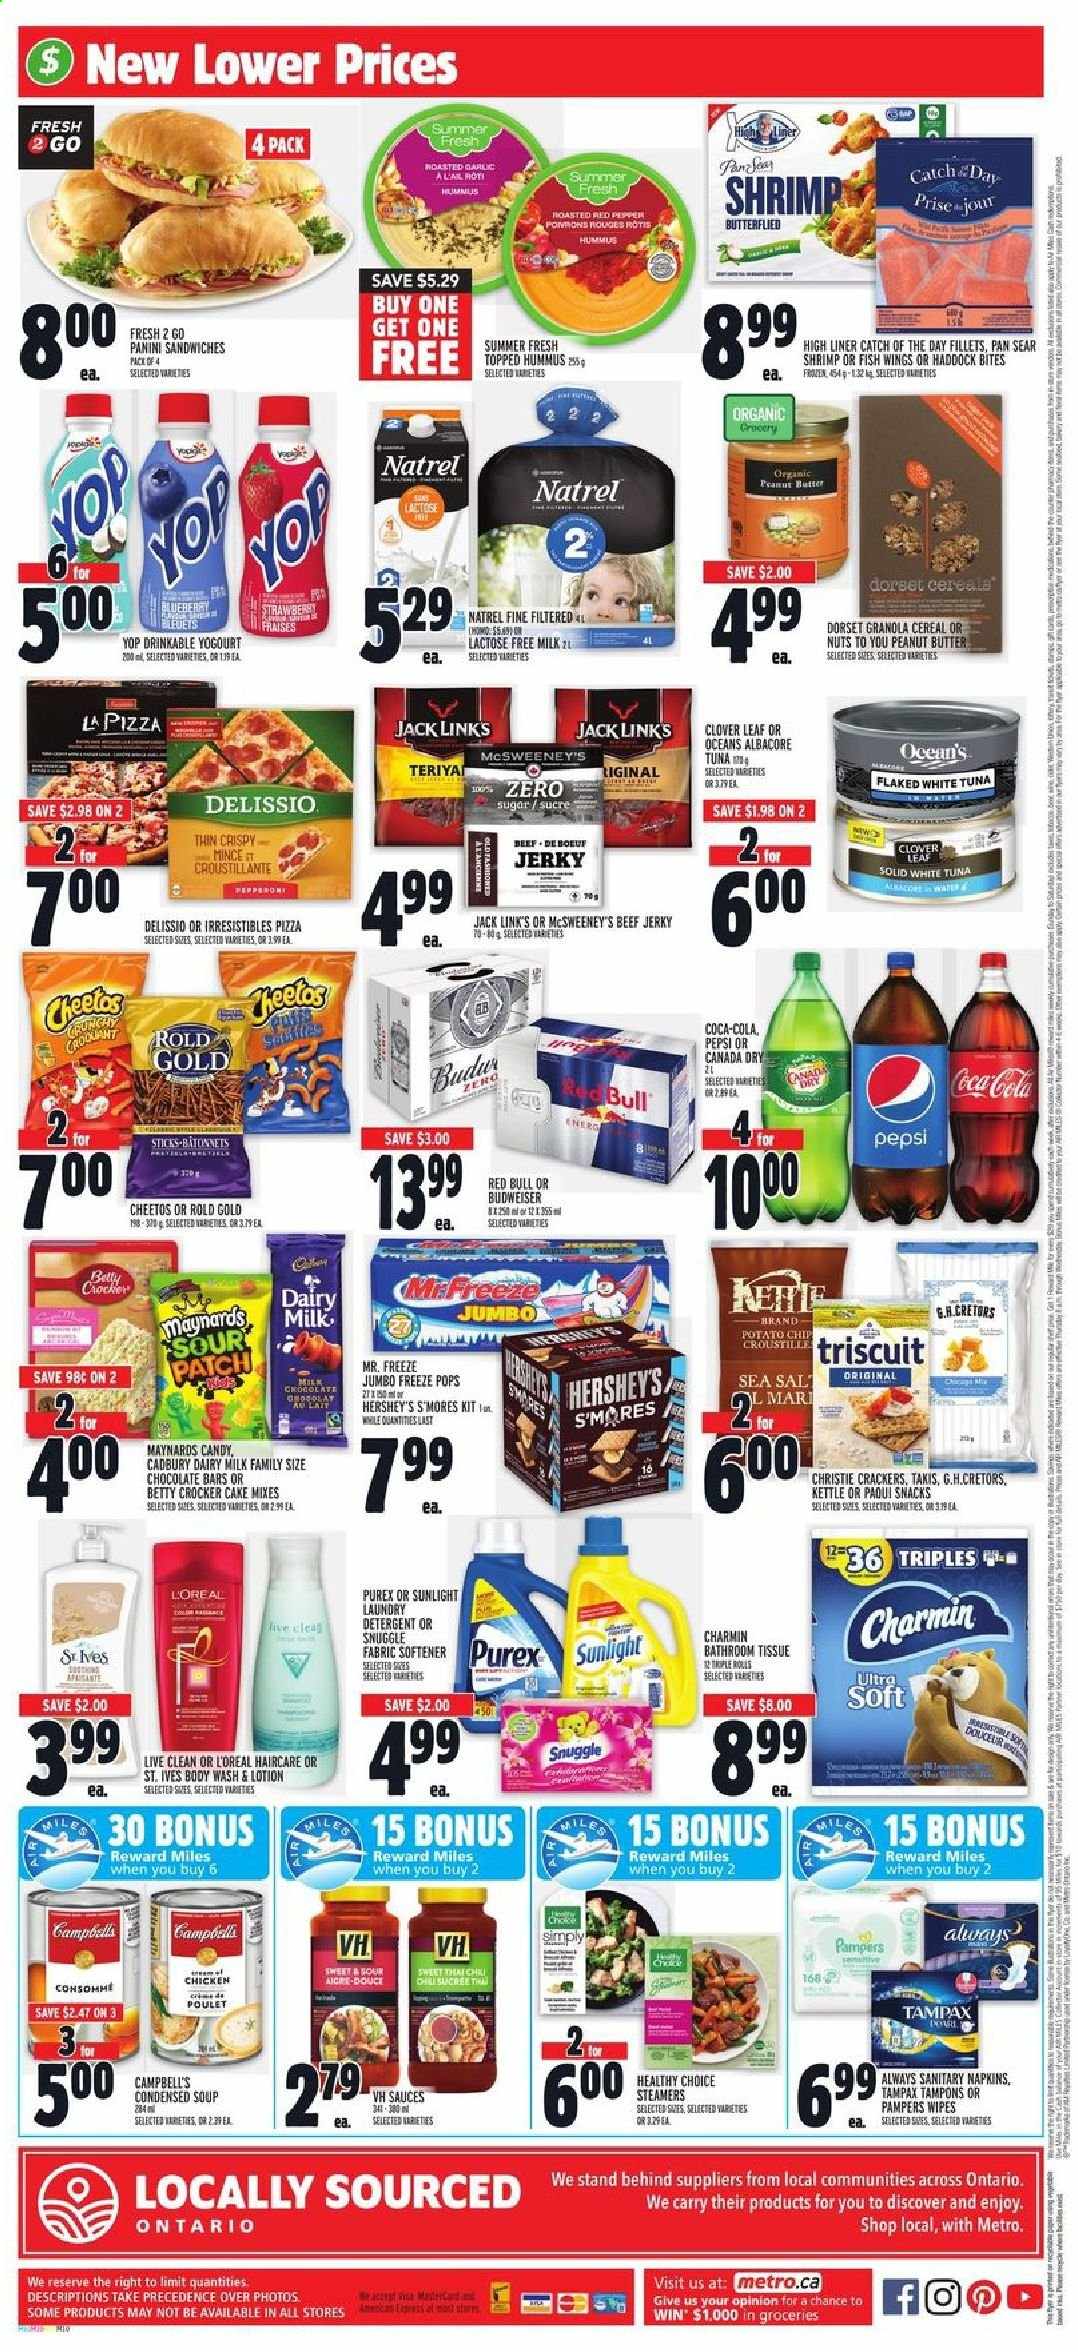 thumbnail - Metro Flyer - May 20, 2021 - May 26, 2021 - Sales products - cake, panini, tuna, haddock, shrimps, Campbell's, pizza, sandwich, condensed soup, soup, instant soup, Healthy Choice, beef jerky, jerky, pepperoni, hummus, Clover, lactose free milk, Hershey's, snack, crackers, Cadbury, Dairy Milk, Sour Patch, chocolate bar, Cheetos, Jack Link's, sugar, cereals, peanut butter, Canada Dry, Coca-Cola, Pepsi, Red Bull, beer, wipes, napkins, bath tissue, Charmin, Snuggle, fabric softener, Sunlight, Purex, body wash, sanitary napkins, tampons, L’Oréal, body lotion, pan, granola, Tampax, Pampers. Page 10.